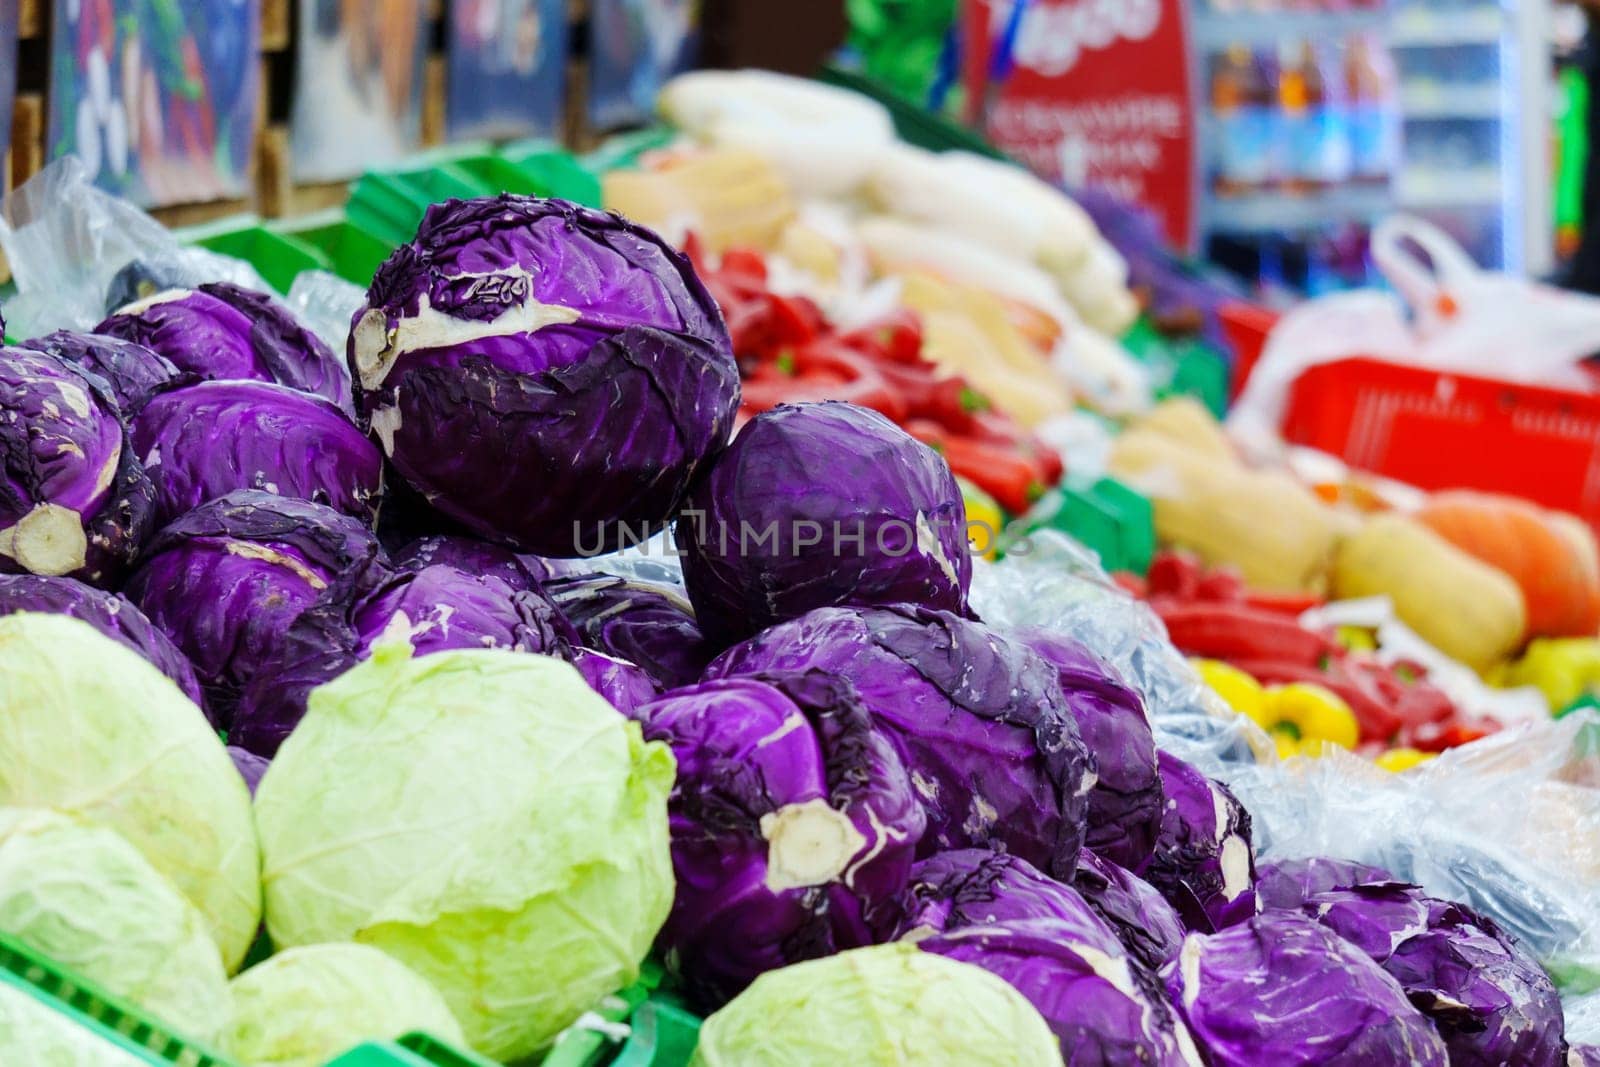 Display of Fresh Cabbages at a Bustling Local Farmers Market in the Heart of the City by darksoul72